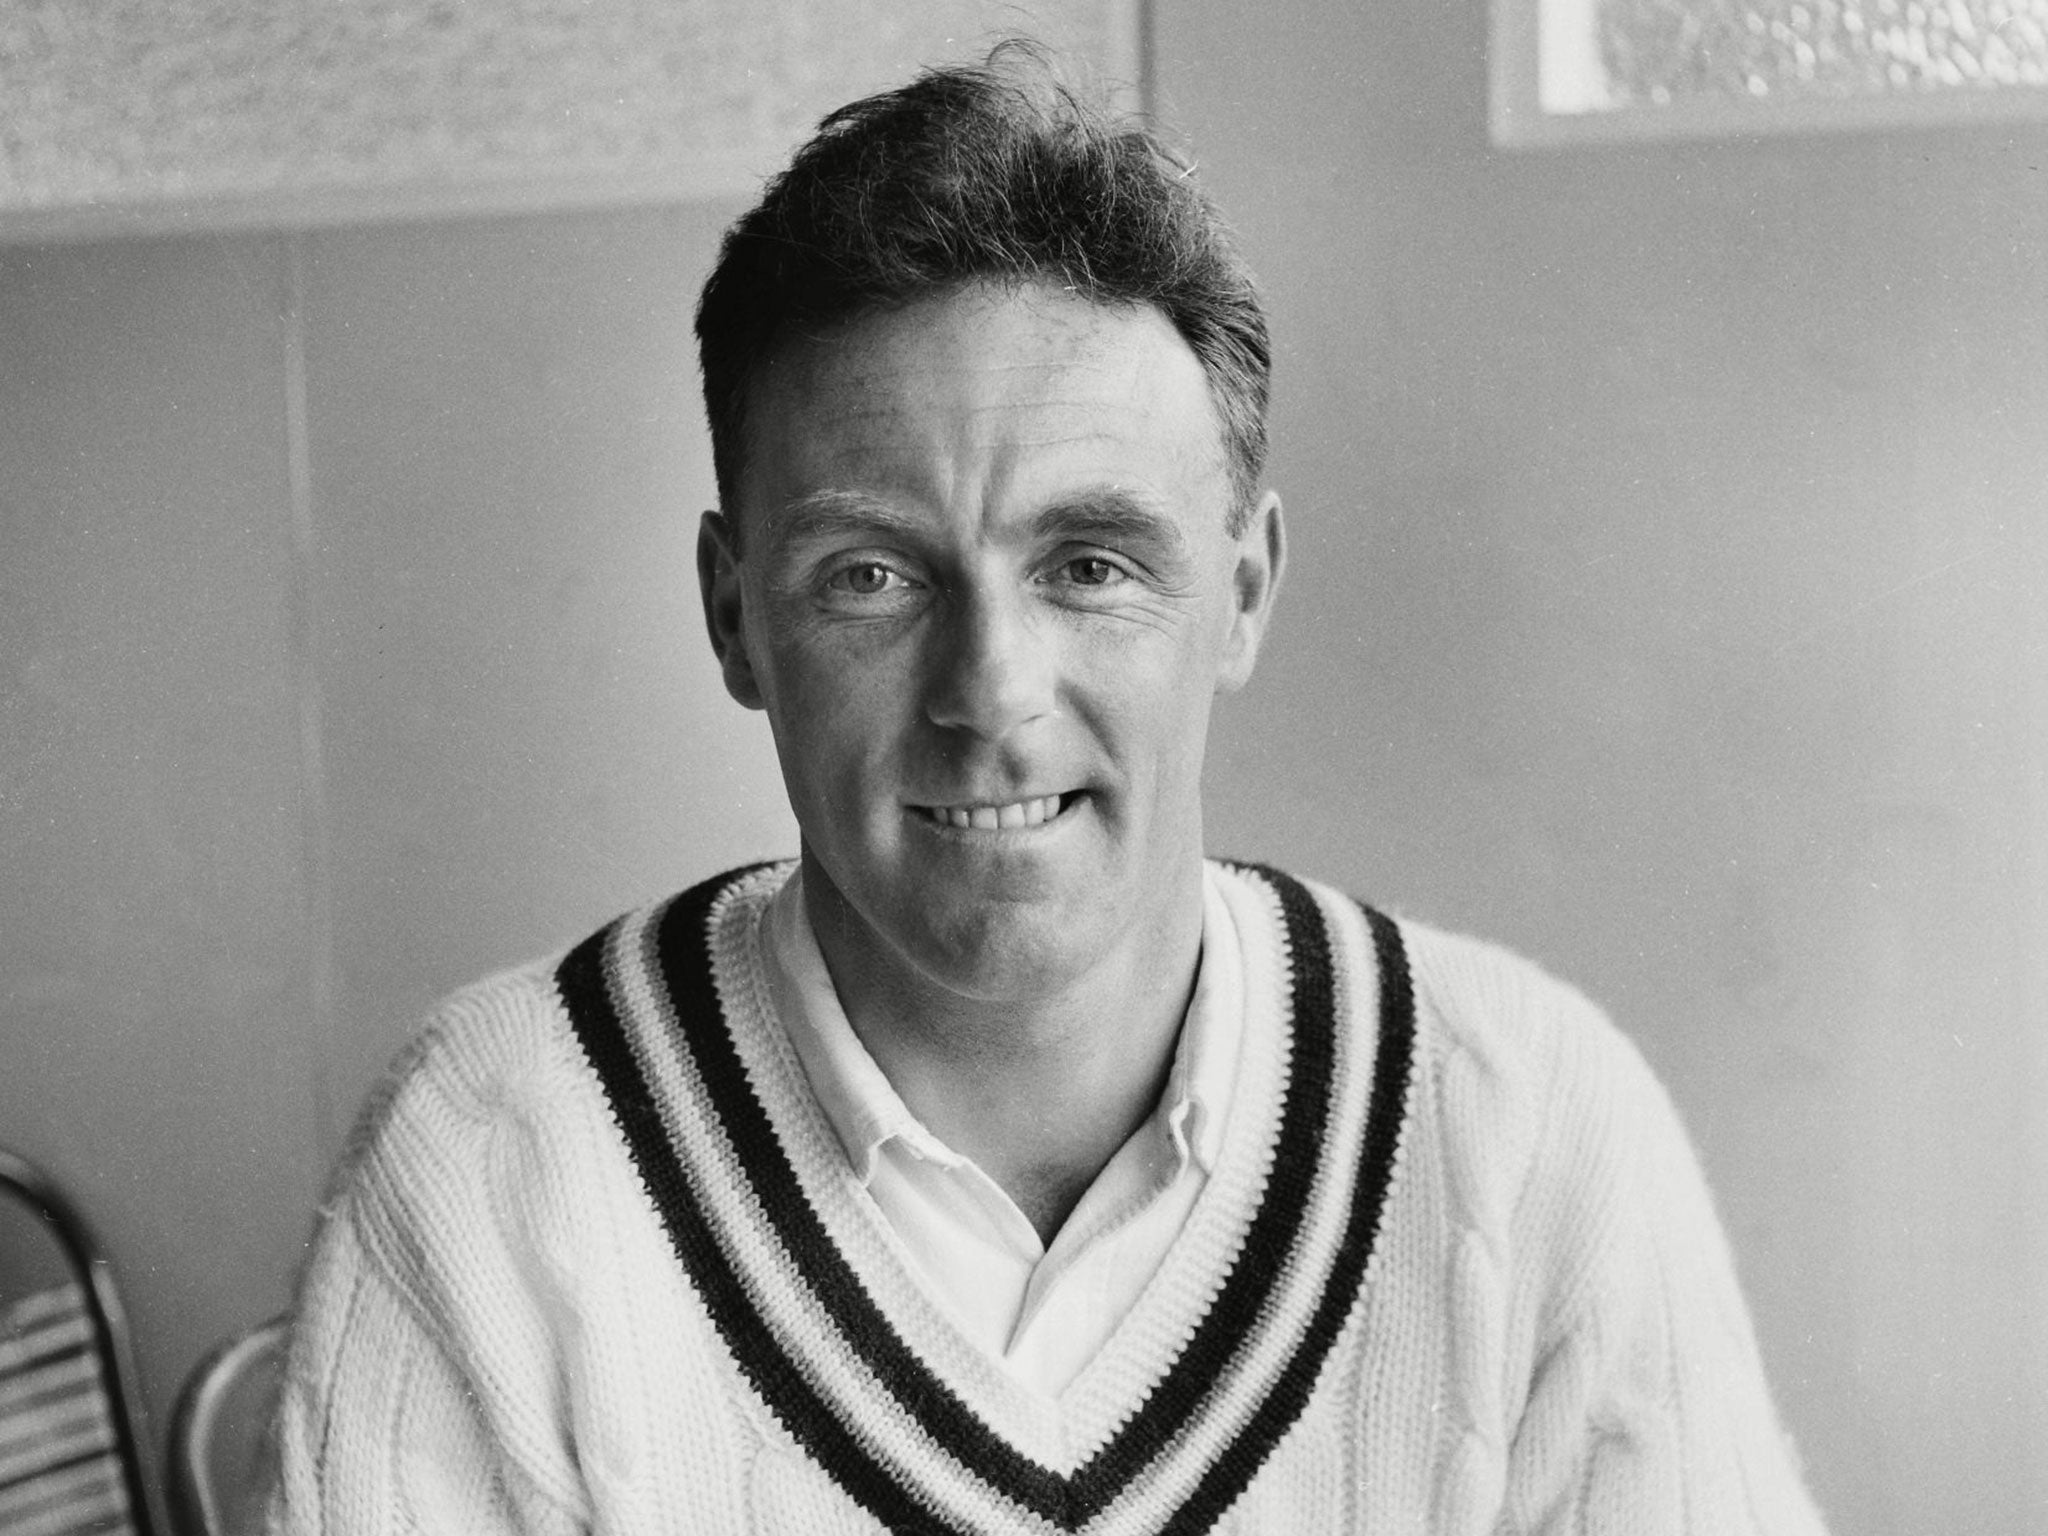 Bannister’s greatest feat was perhaps his leading role in the formation of the Professional Cricketers’ Association